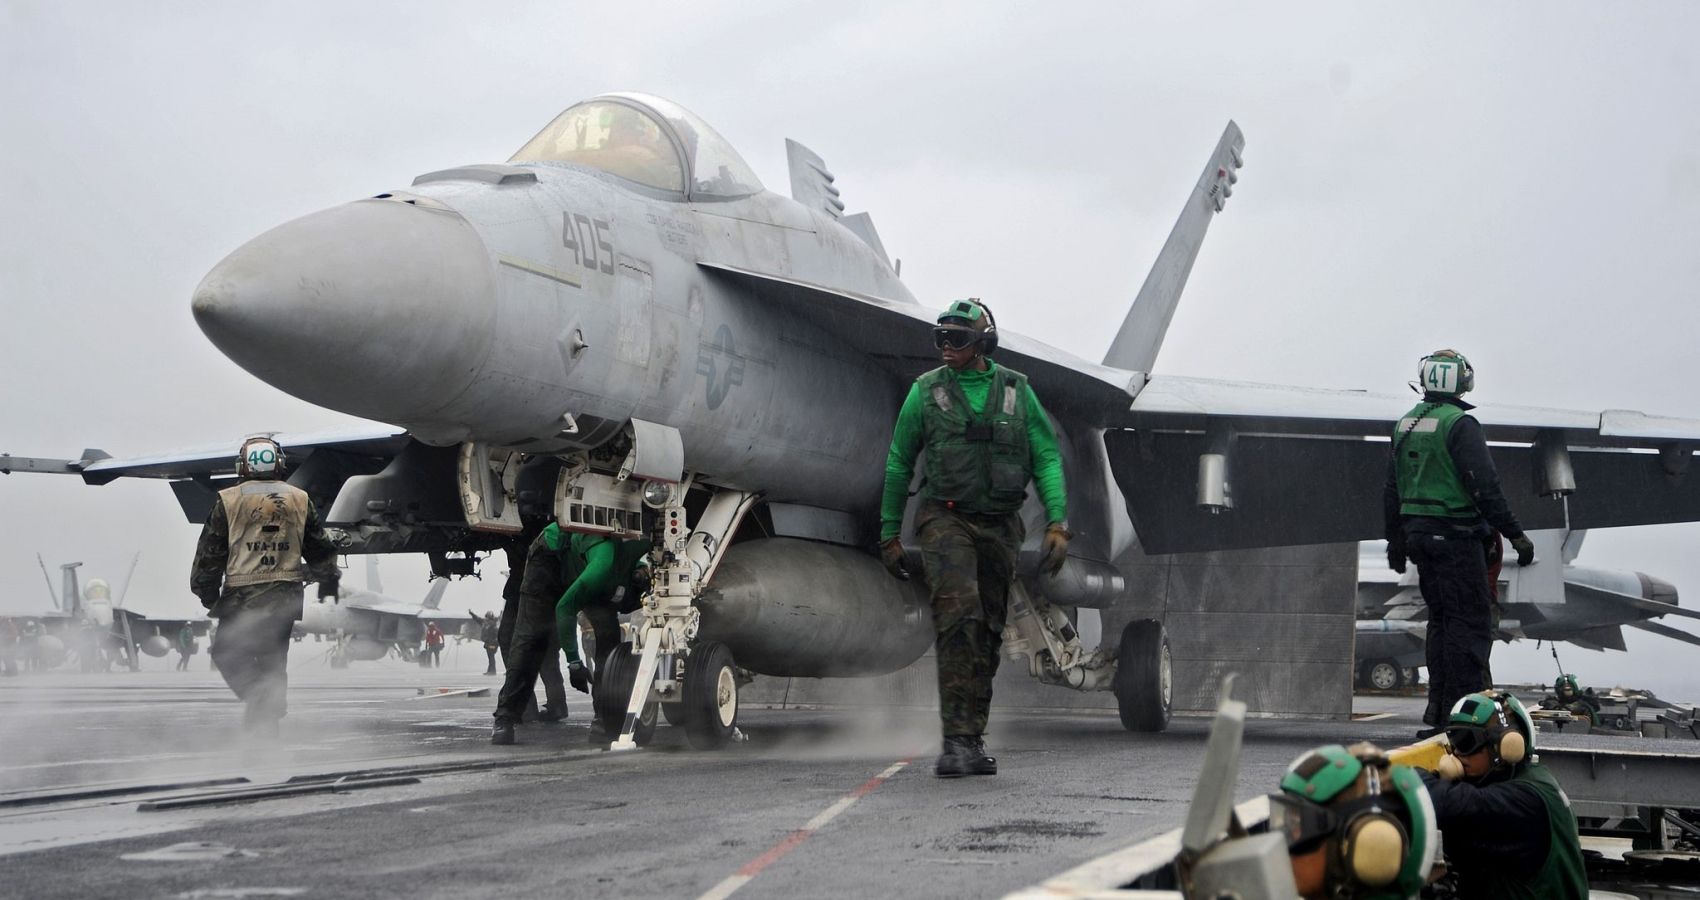 What Makes The F/A-18 Super Hornet Such A Lethal Combat Aircraft